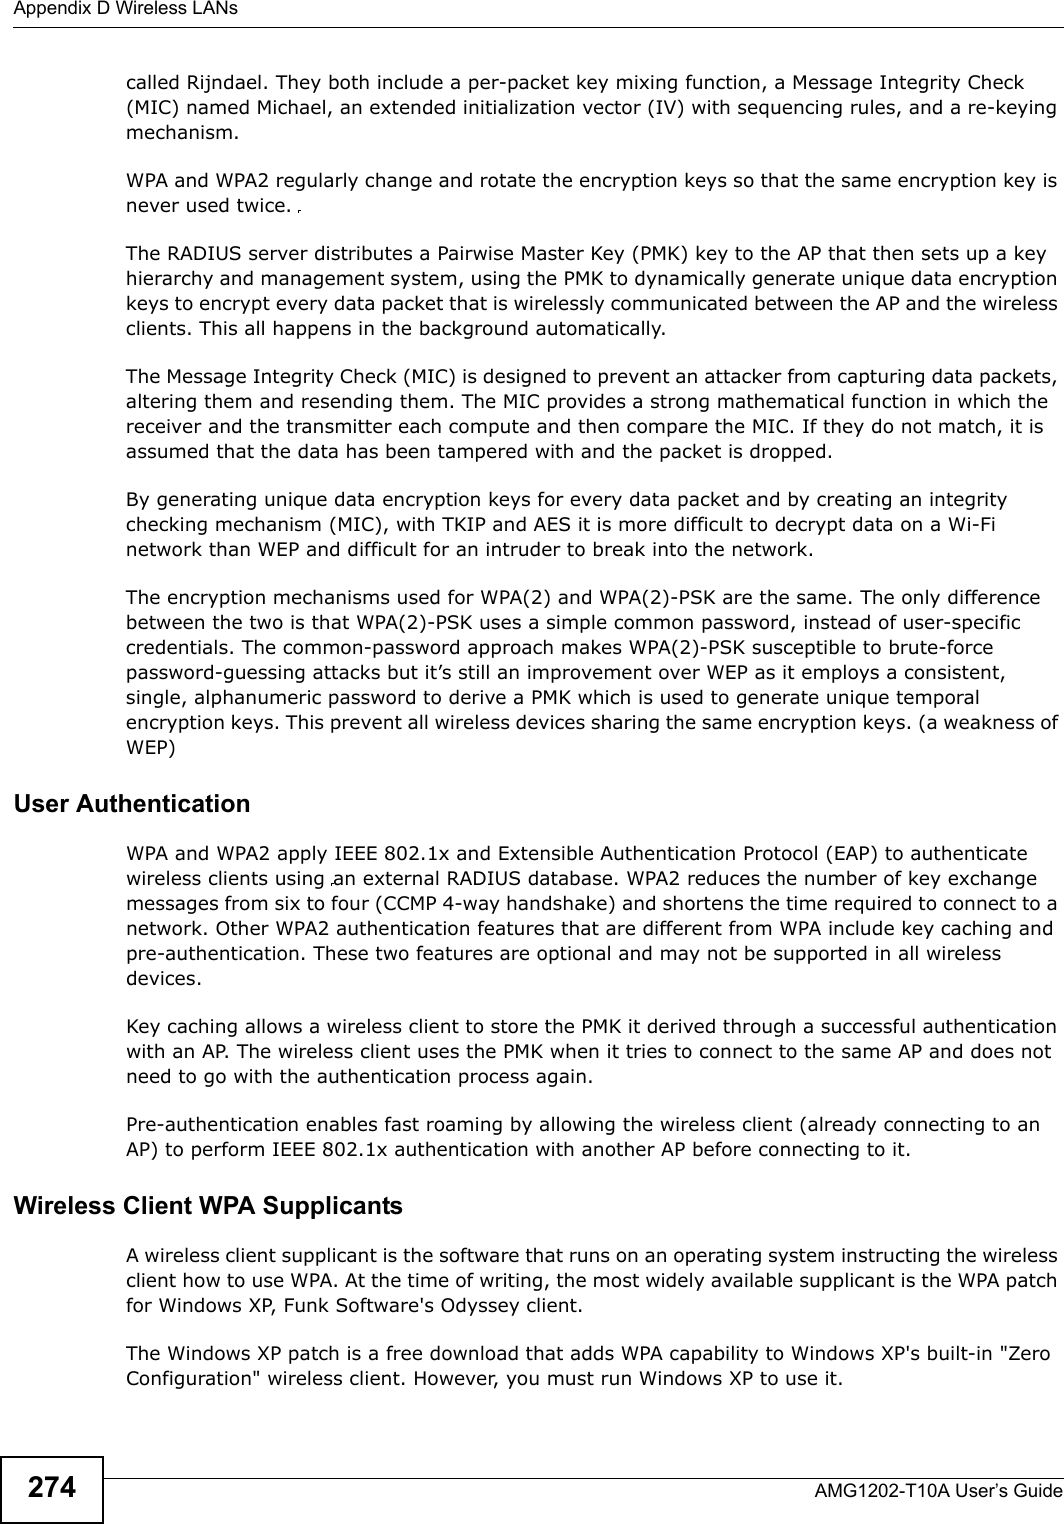 Appendix D Wireless LANsAMG1202-T10A User’s Guide274called Rijndael. They both include a per-packet key mixing function, a Message Integrity Check (MIC) named Michael, an extended initialization vector (IV) with sequencing rules, and a re-keying mechanism.WPA and WPA2 regularly change and rotate the encryption keys so that the same encryption key is never used twice. The RADIUS server distributes a Pairwise Master Key (PMK) key to the AP that then sets up a key hierarchy and management system, using the PMK to dynamically generate unique data encryption keys to encrypt every data packet that is wirelessly communicated between the AP and the wireless clients. This all happens in the background automatically.The Message Integrity Check (MIC) is designed to prevent an attacker from capturing data packets, altering them and resending them. The MIC provides a strong mathematical function in which the receiver and the transmitter each compute and then compare the MIC. If they do not match, it is assumed that the data has been tampered with and the packet is dropped. By generating unique data encryption keys for every data packet and by creating an integrity checking mechanism (MIC), with TKIP and AES it is more difficult to decrypt data on a Wi-Fi network than WEP and difficult for an intruder to break into the network. The encryption mechanisms used for WPA(2) and WPA(2)-PSK are the same. The only difference between the two is that WPA(2)-PSK uses a simple common password, instead of user-specific credentials. The common-password approach makes WPA(2)-PSK susceptible to brute-force password-guessing attacks but it’s still an improvement over WEP as it employs a consistent, single, alphanumeric password to derive a PMK which is used to generate unique temporal encryption keys. This prevent all wireless devices sharing the same encryption keys. (a weakness of WEP)User Authentication WPA and WPA2 apply IEEE 802.1x and Extensible Authentication Protocol (EAP) to authenticate wireless clients using an external RADIUS database. WPA2 reduces the number of key exchange messages from six to four (CCMP 4-way handshake) and shortens the time required to connect to a network. Other WPA2 authentication features that are different from WPA include key caching and pre-authentication. These two features are optional and may not be supported in all wireless devices.Key caching allows a wireless client to store the PMK it derived through a successful authentication with an AP. The wireless client uses the PMK when it tries to connect to the same AP and does not need to go with the authentication process again.Pre-authentication enables fast roaming by allowing the wireless client (already connecting to an AP) to perform IEEE 802.1x authentication with another AP before connecting to it.Wireless Client WPA SupplicantsA wireless client supplicant is the software that runs on an operating system instructing the wireless client how to use WPA. At the time of writing, the most widely available supplicant is the WPA patch for Windows XP, Funk Software&apos;s Odyssey client. The Windows XP patch is a free download that adds WPA capability to Windows XP&apos;s built-in &quot;Zero Configuration&quot; wireless client. However, you must run Windows XP to use it. 